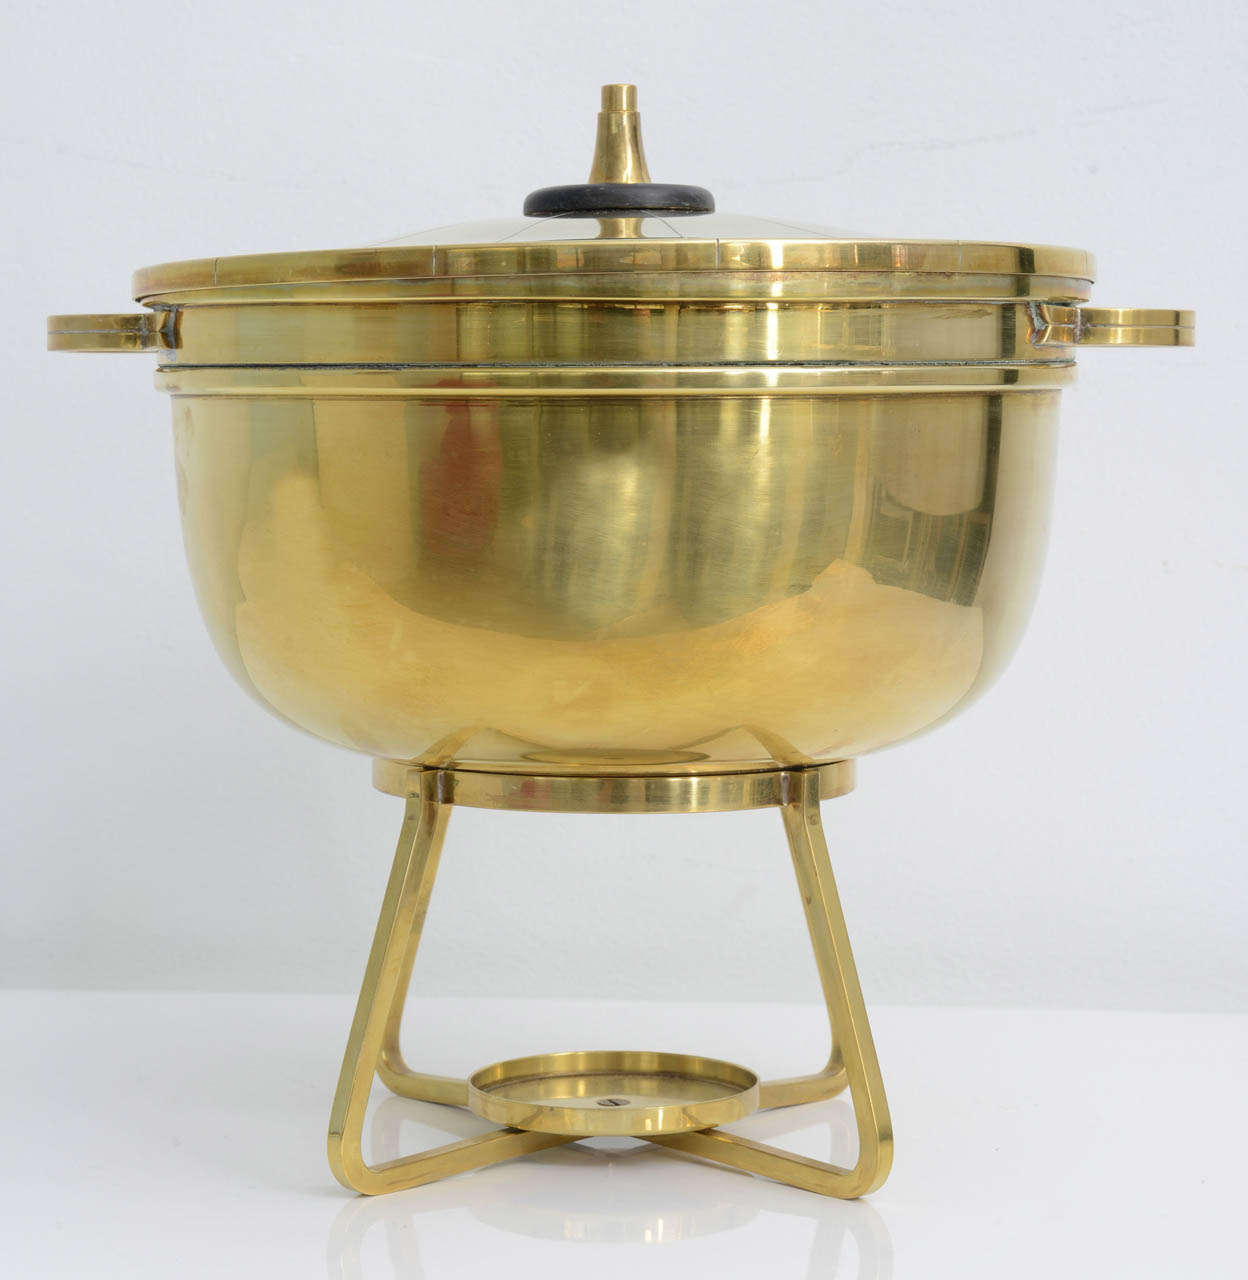 American Mid-Century Modern Brass Dorlyn Silversmith Tommi Parzinger Serving Dish For Sale